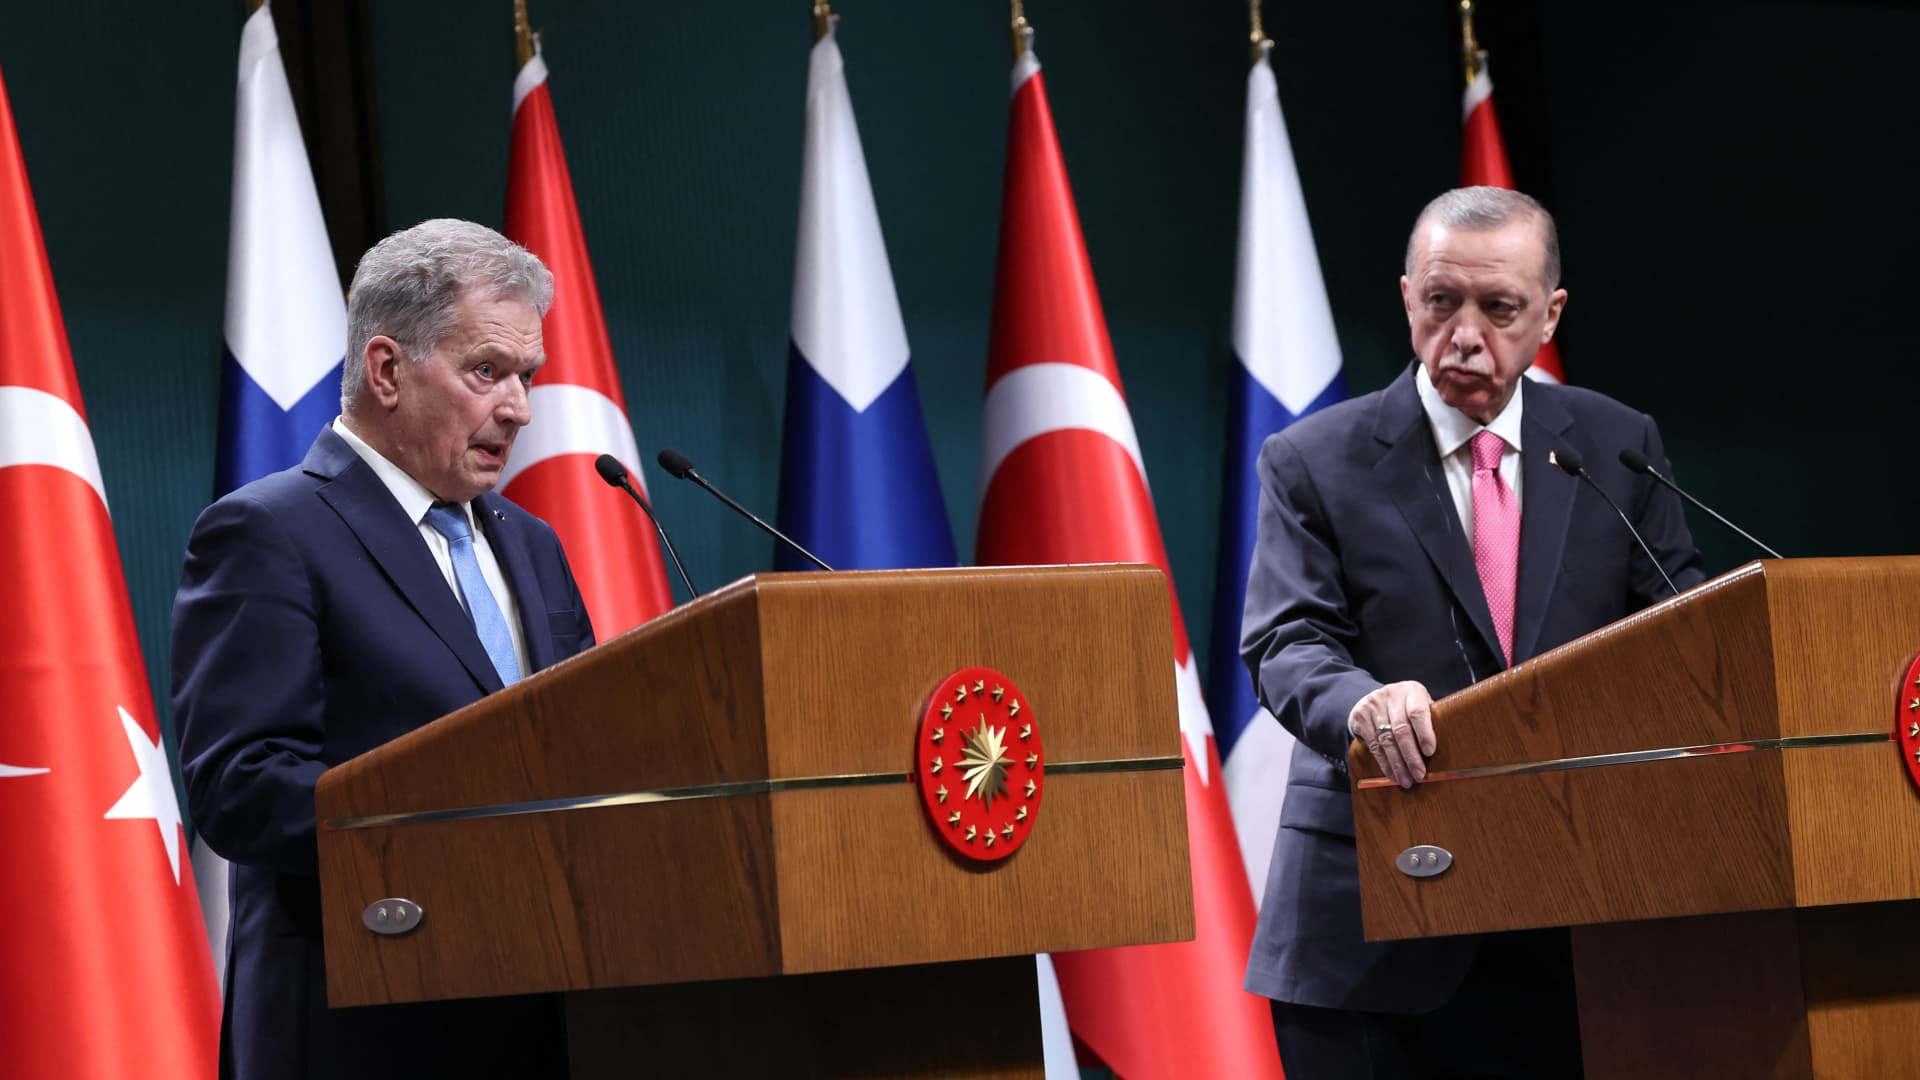 Turkey formally approves Finland's NATO membership, in setback for Russia